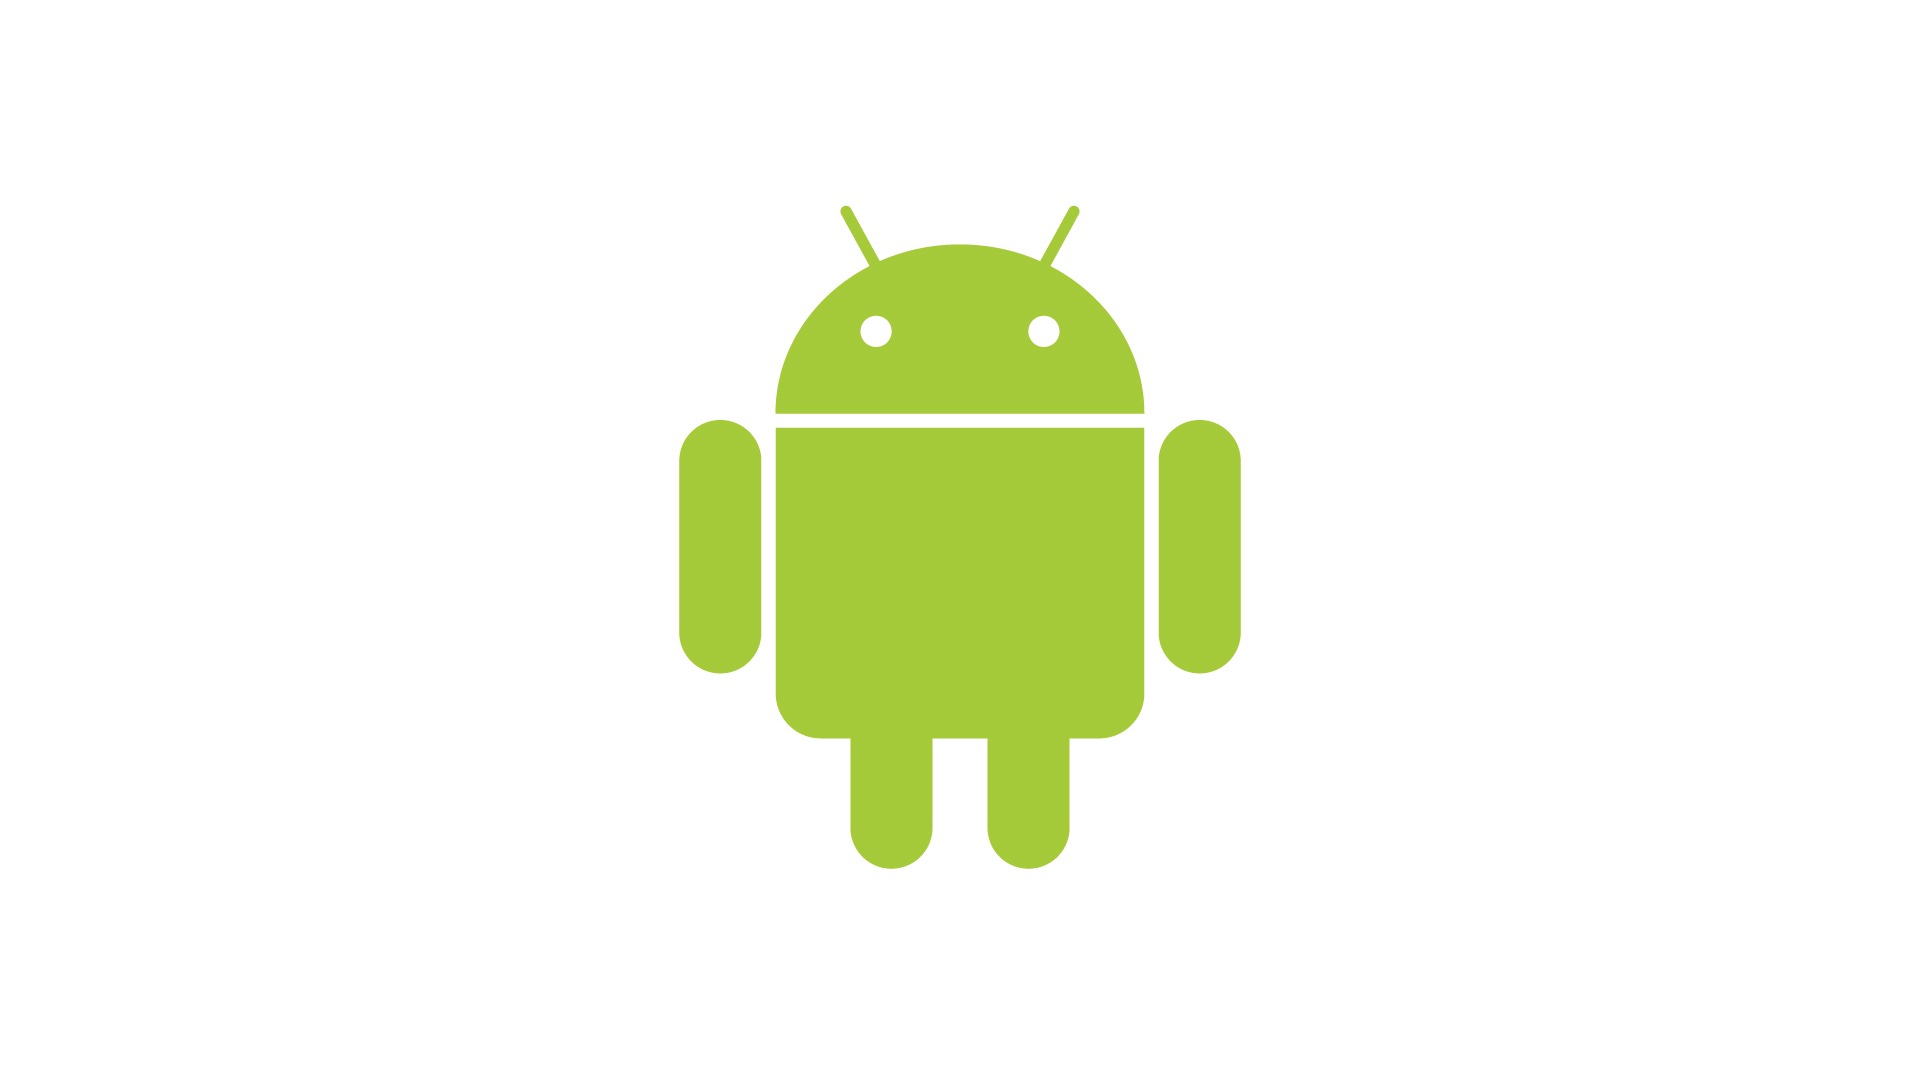 Android On White Background Wallpaper